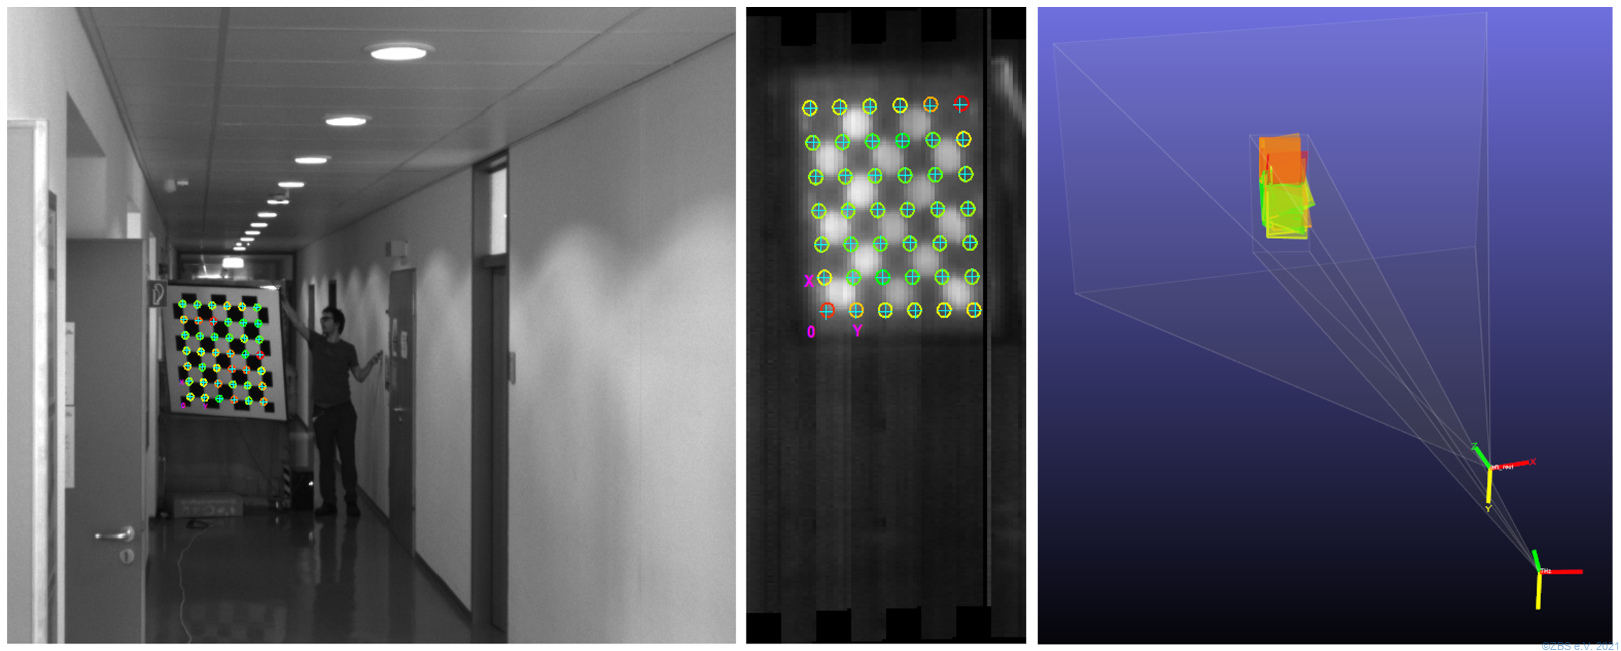 Extrinsic calibration of an imaging THz scanner (body scanner) and a monochrome camera. On the left is the image of the target taken with a standard camera and in the middle the image of the same target recorded with the THz camera. The 3D view on the right uses the camera coordinate systems to show the relative orientation and position of these two sensors to another as well as the different target poses.